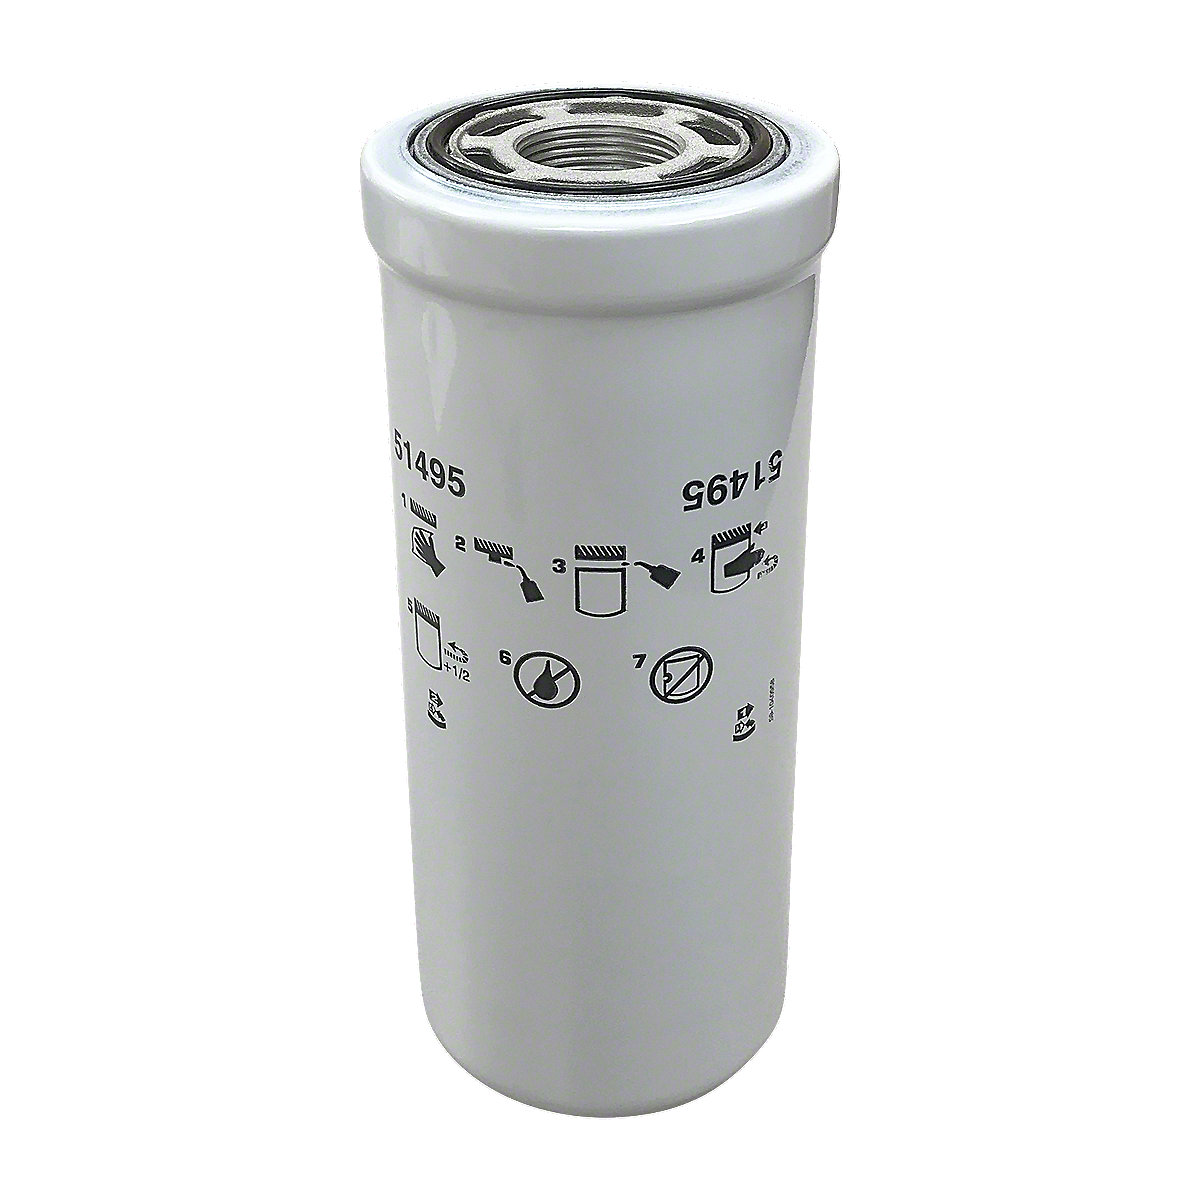 Hydraulic Filter - 215, 245, 255 and more